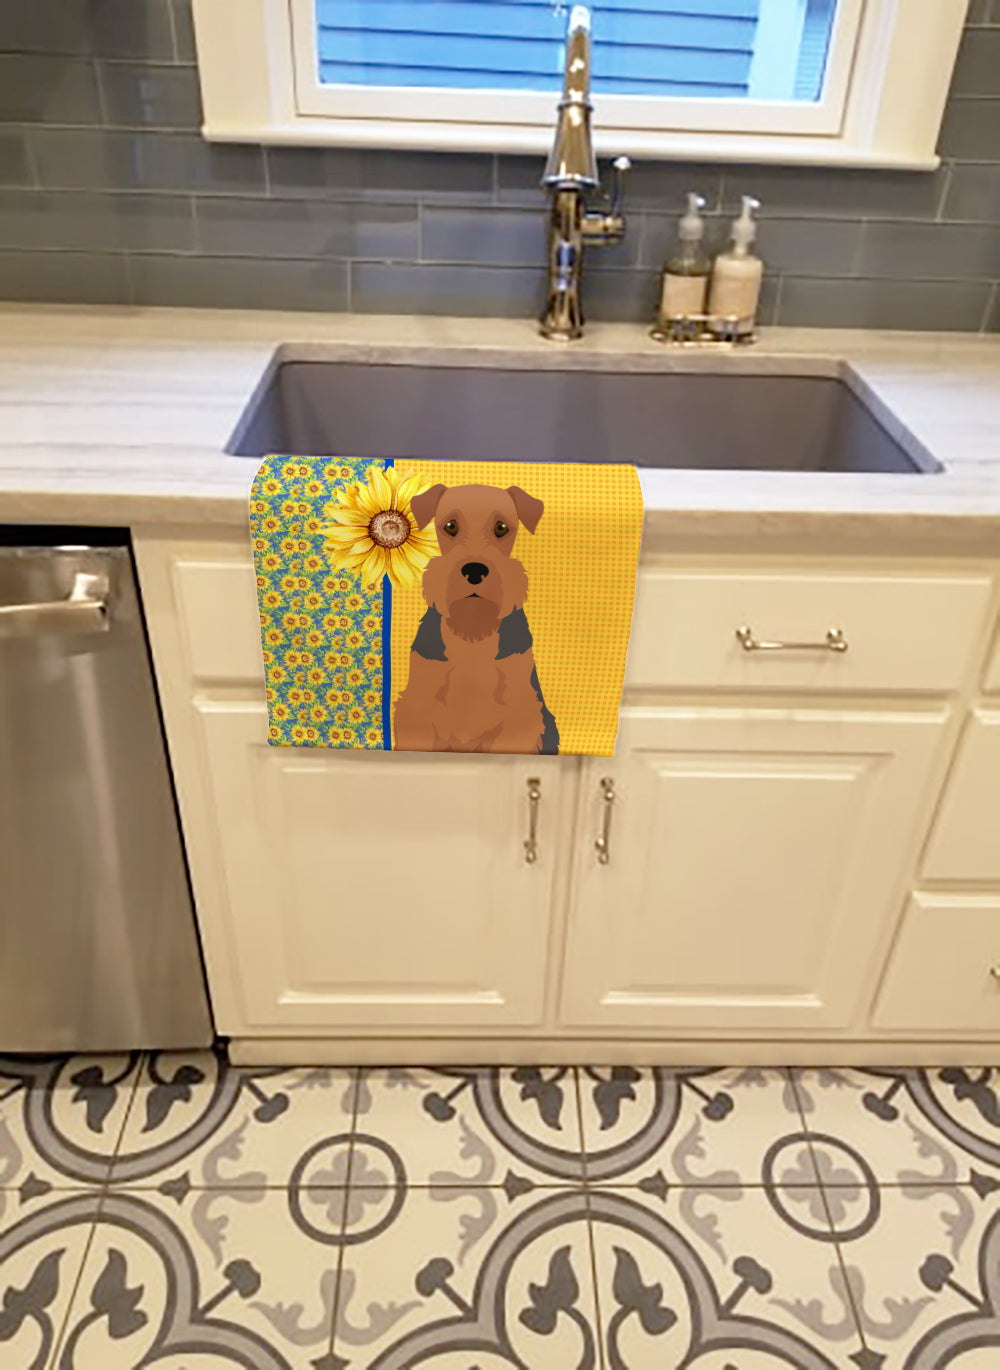 Buy this Summer Sunflowers Grizzle and Tan Airedale Terrier Kitchen Towel